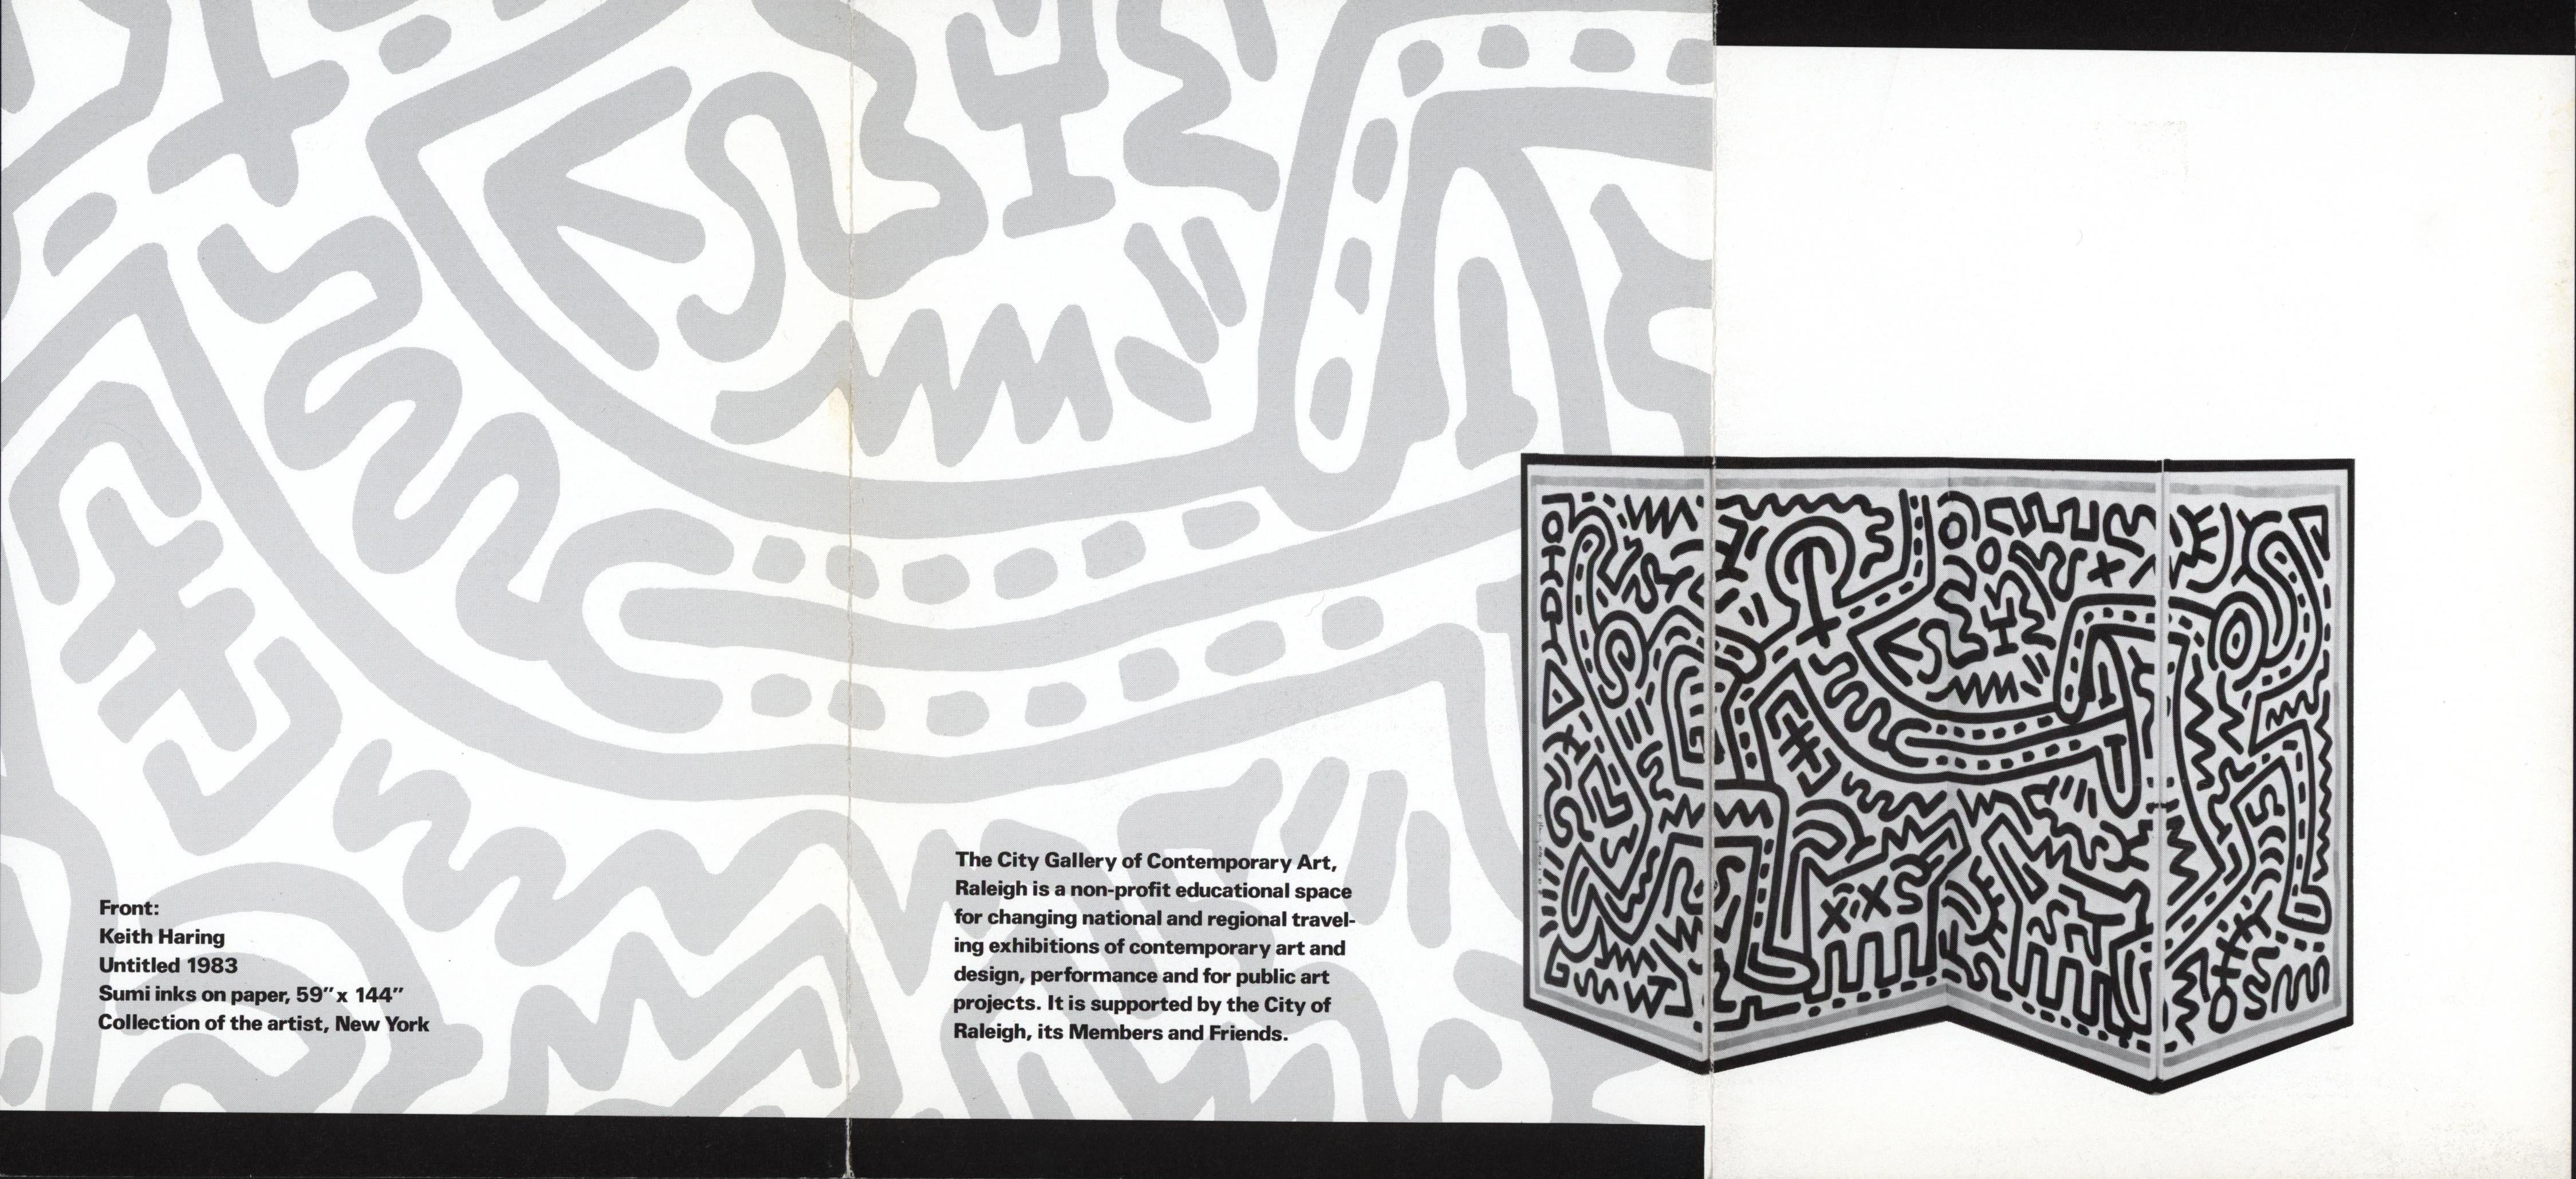 Keith Haring Pop Shop Collection (c.1986-1992) 11